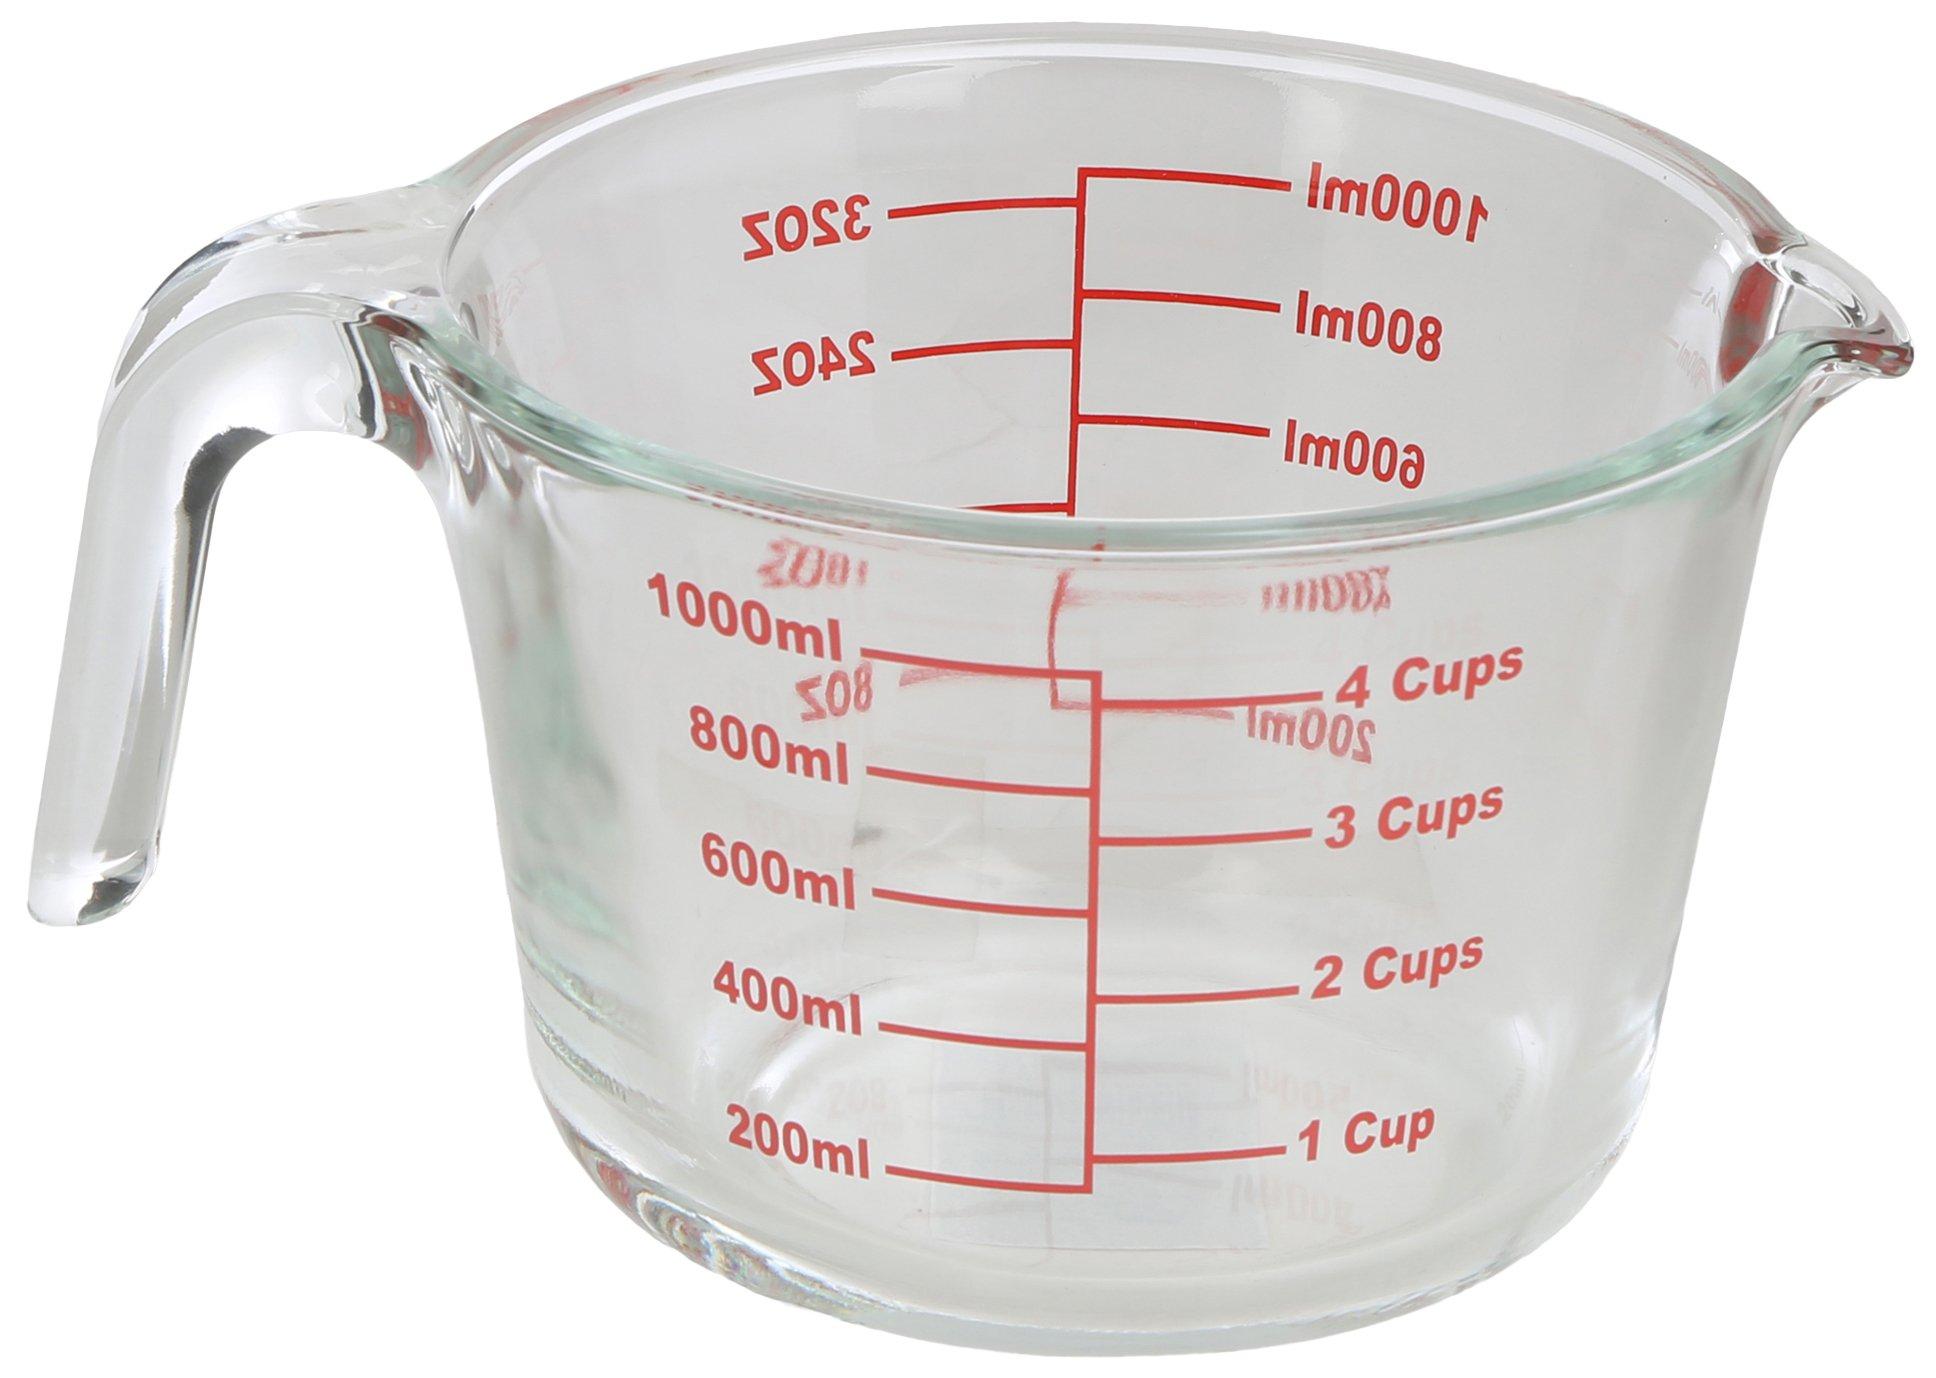 https://images.beallsflorida.com/i/beallsflorida/650-5696-6184-18-yyy/*4-Cup-Glass-Measuring-Cup*?$product$&fmt=auto&qlt=default